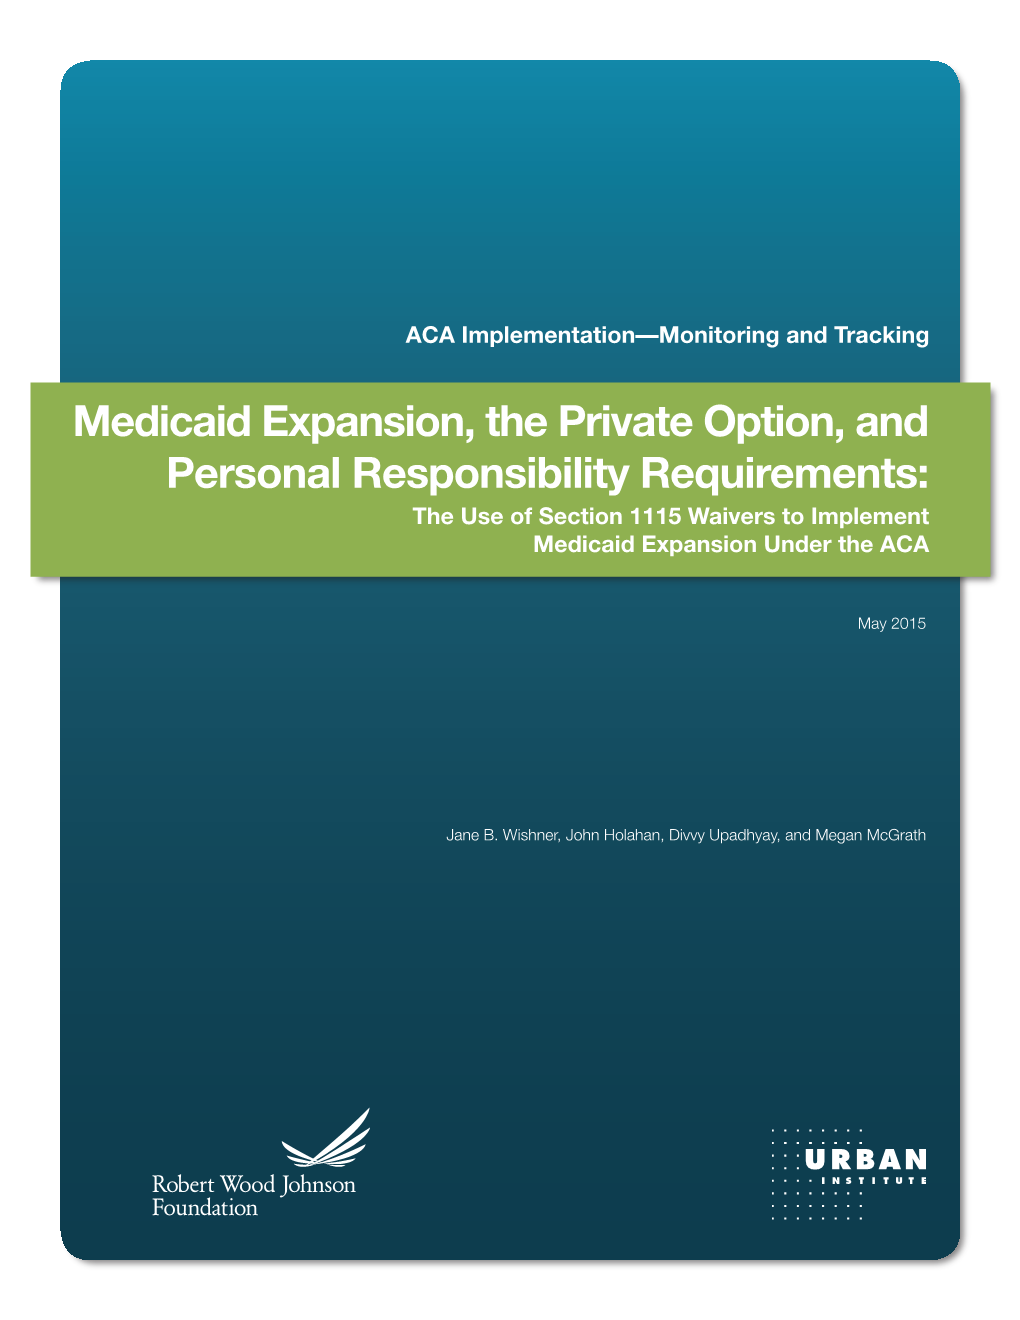 Medicaid Expansion, the Private Option and Personal Responsibility